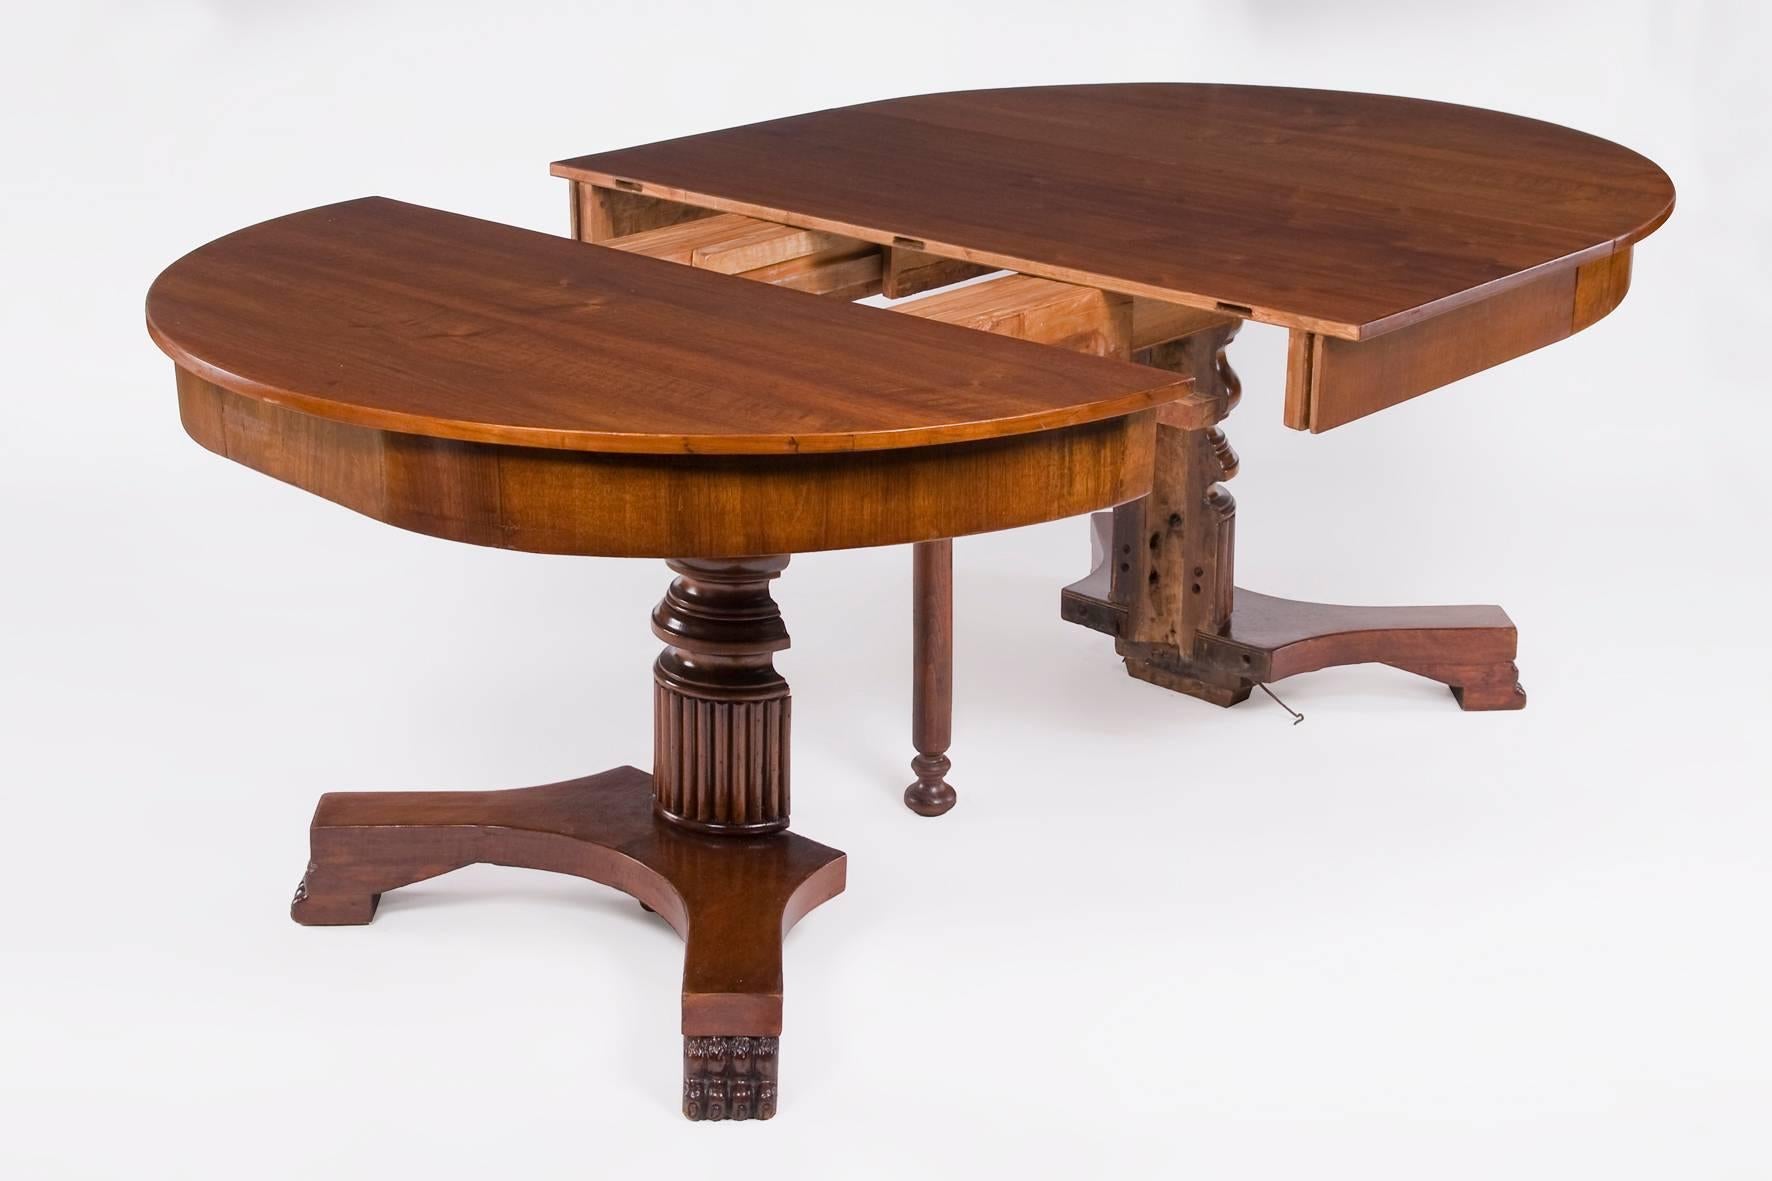 Early 20th Century Antique Empire Extension Table from circa 1900